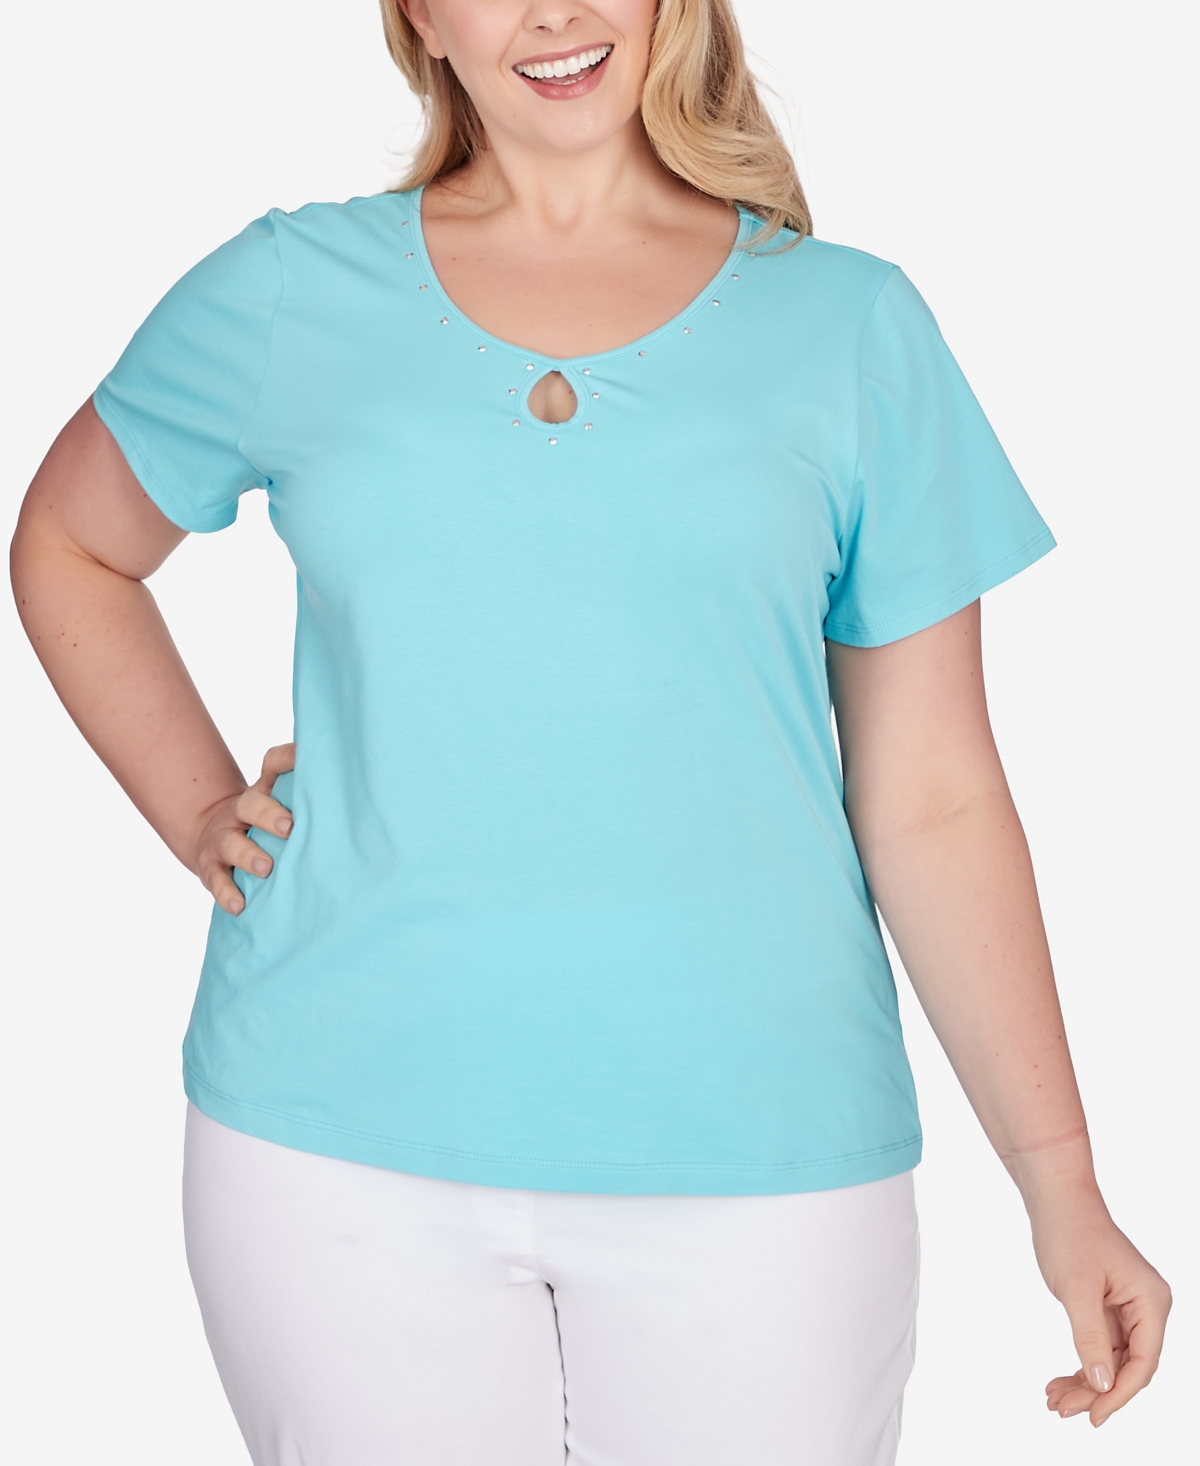 Plus Size Spring Into Action Solid Short Sleeve Shirt - Medium Blue